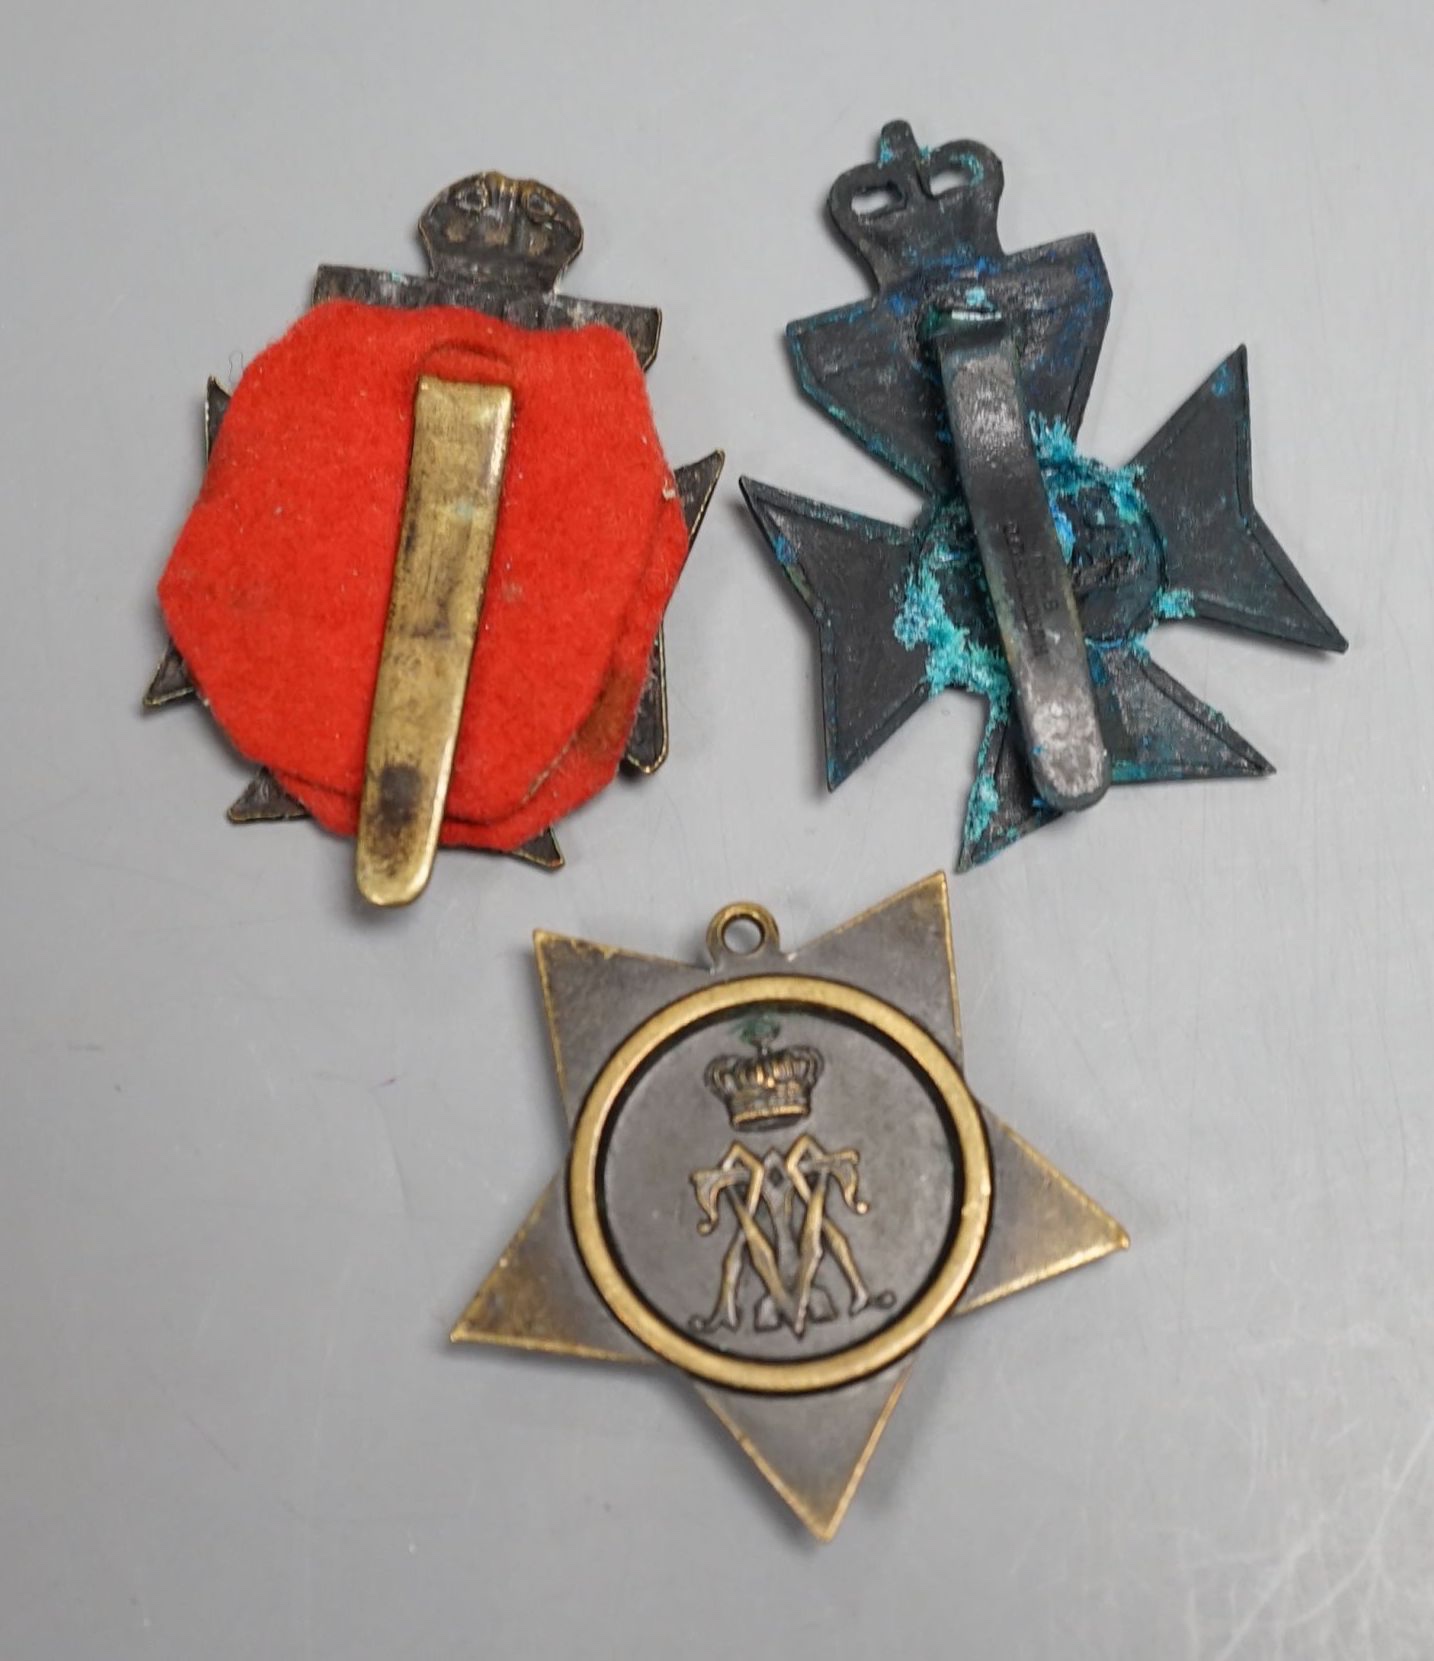 A Khedive's Star, Egypt 1882 and two cap badges.